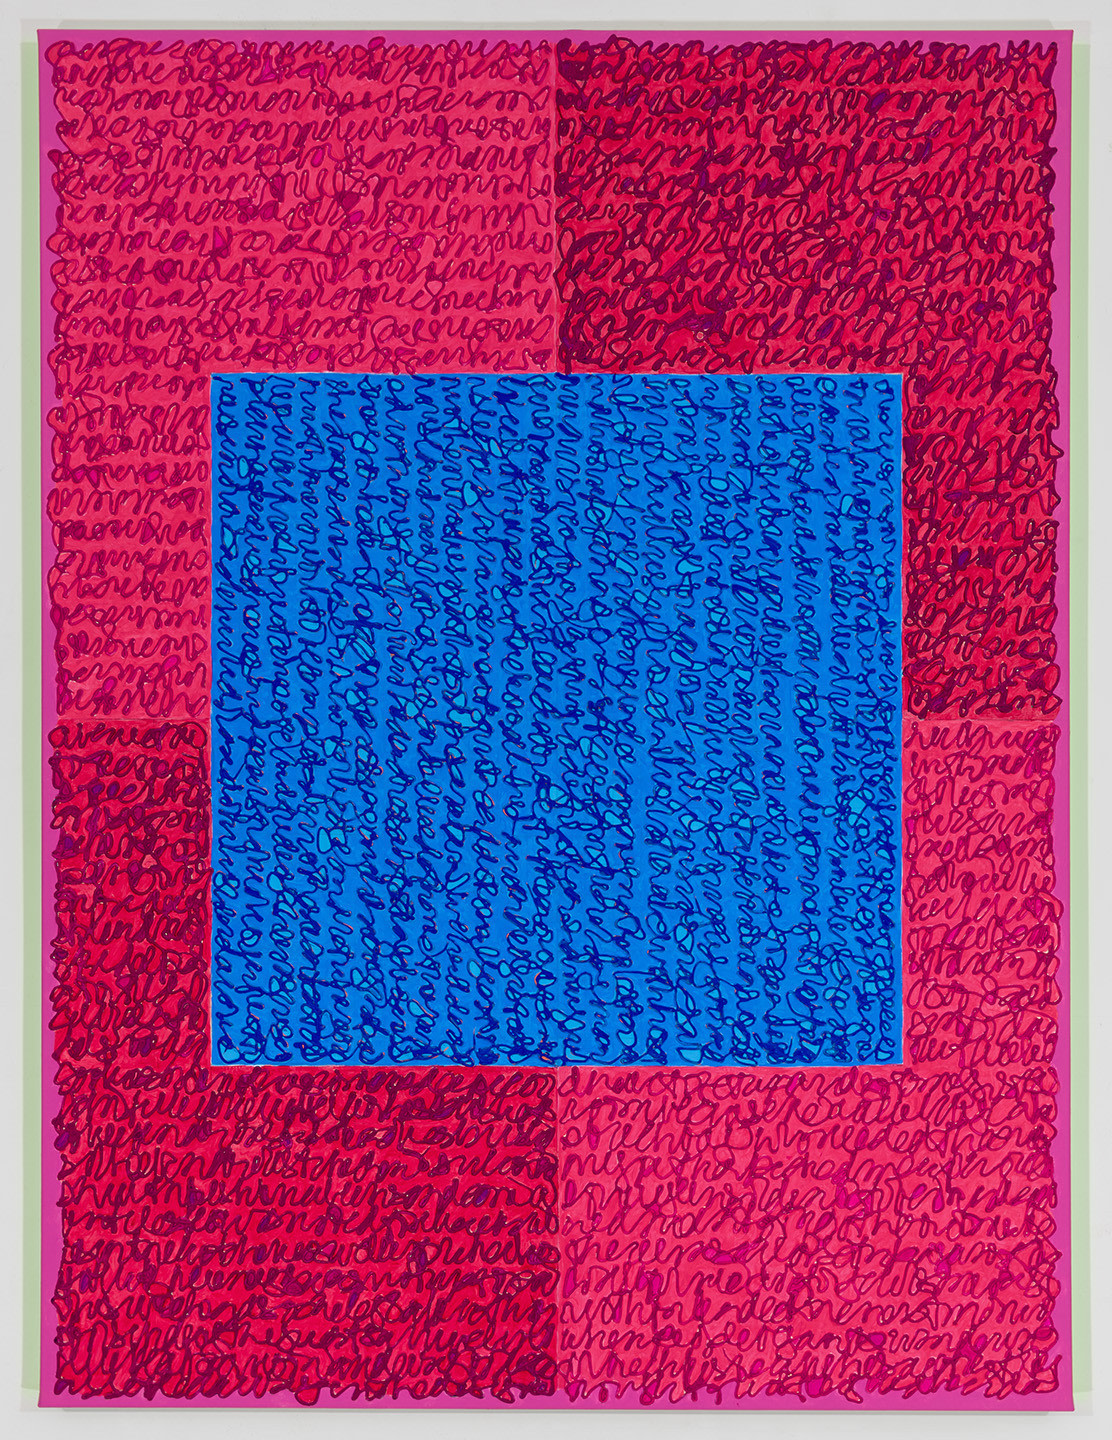 Louise P. Sloane, Labor Day, 2018, Acrylic paint and pastes on linen, 48 x 36 inches, Signed, titled and dated on the verso, four rectangles and a central square (different shades of pink with blue) and personal text written over the squares to create three dimensional texture. Louise P. Sloane has been creating abstract paintings since 1974.